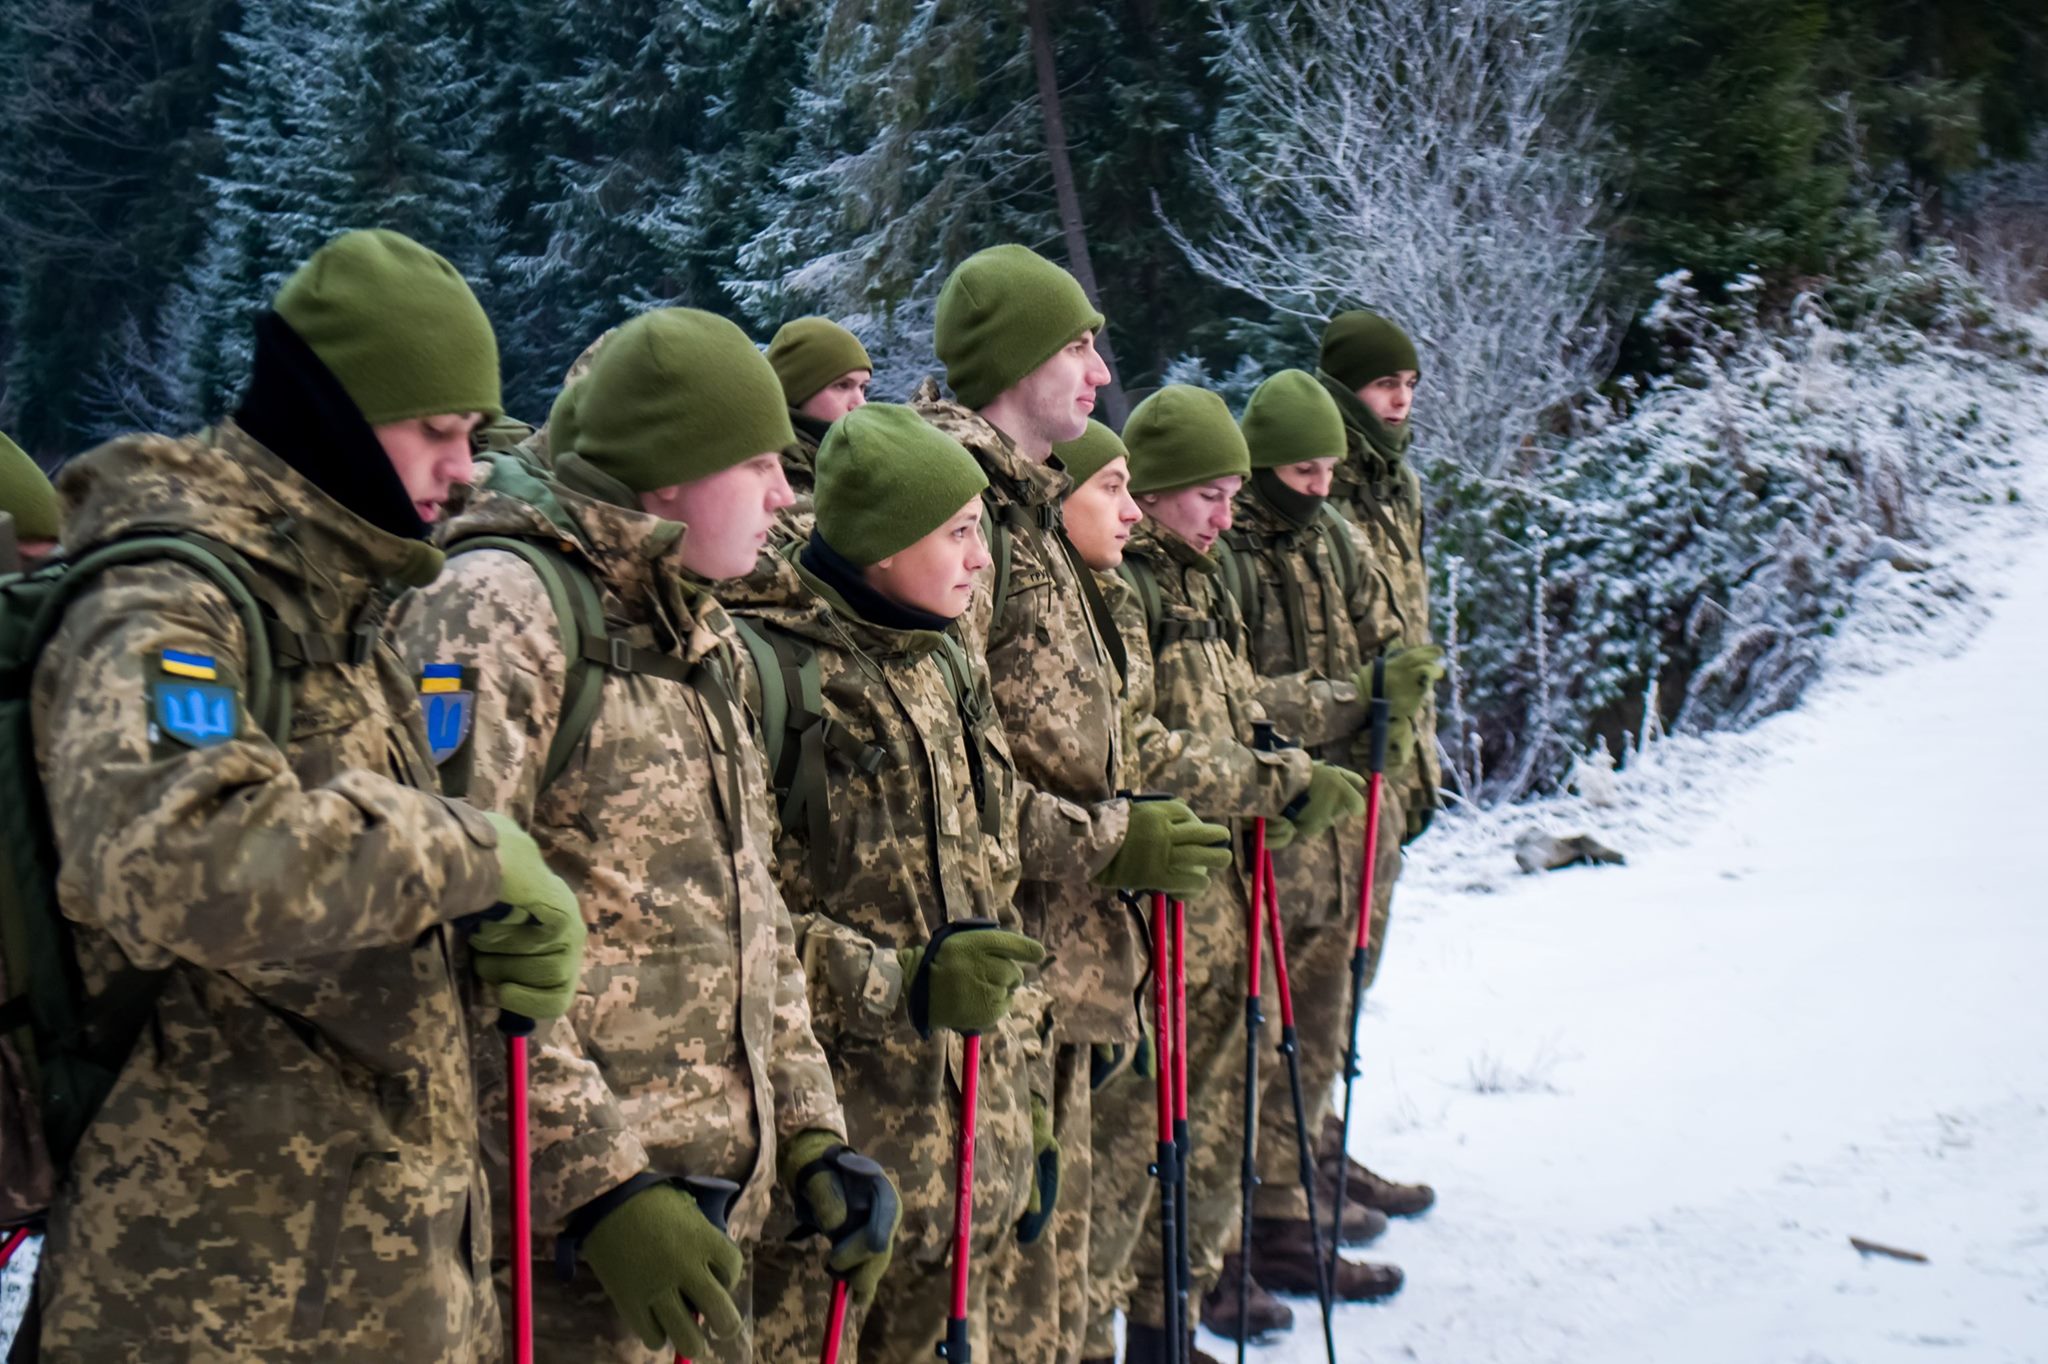 The Armed Forces of Ukraine launched a pilot course of mountain training